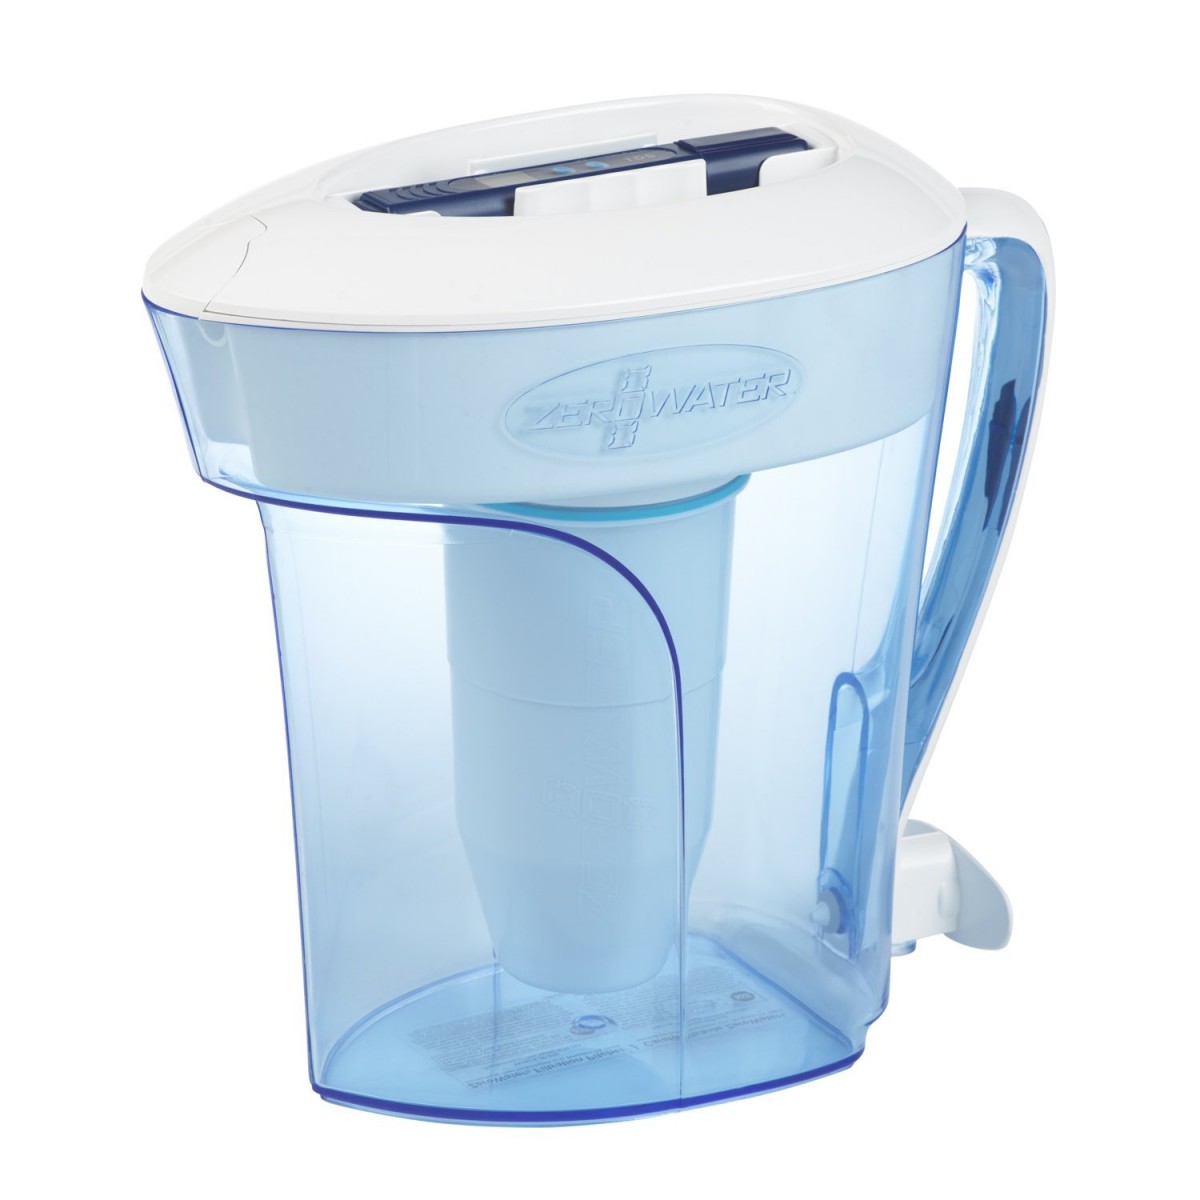 zerowater 10-cup pitcher water filter review